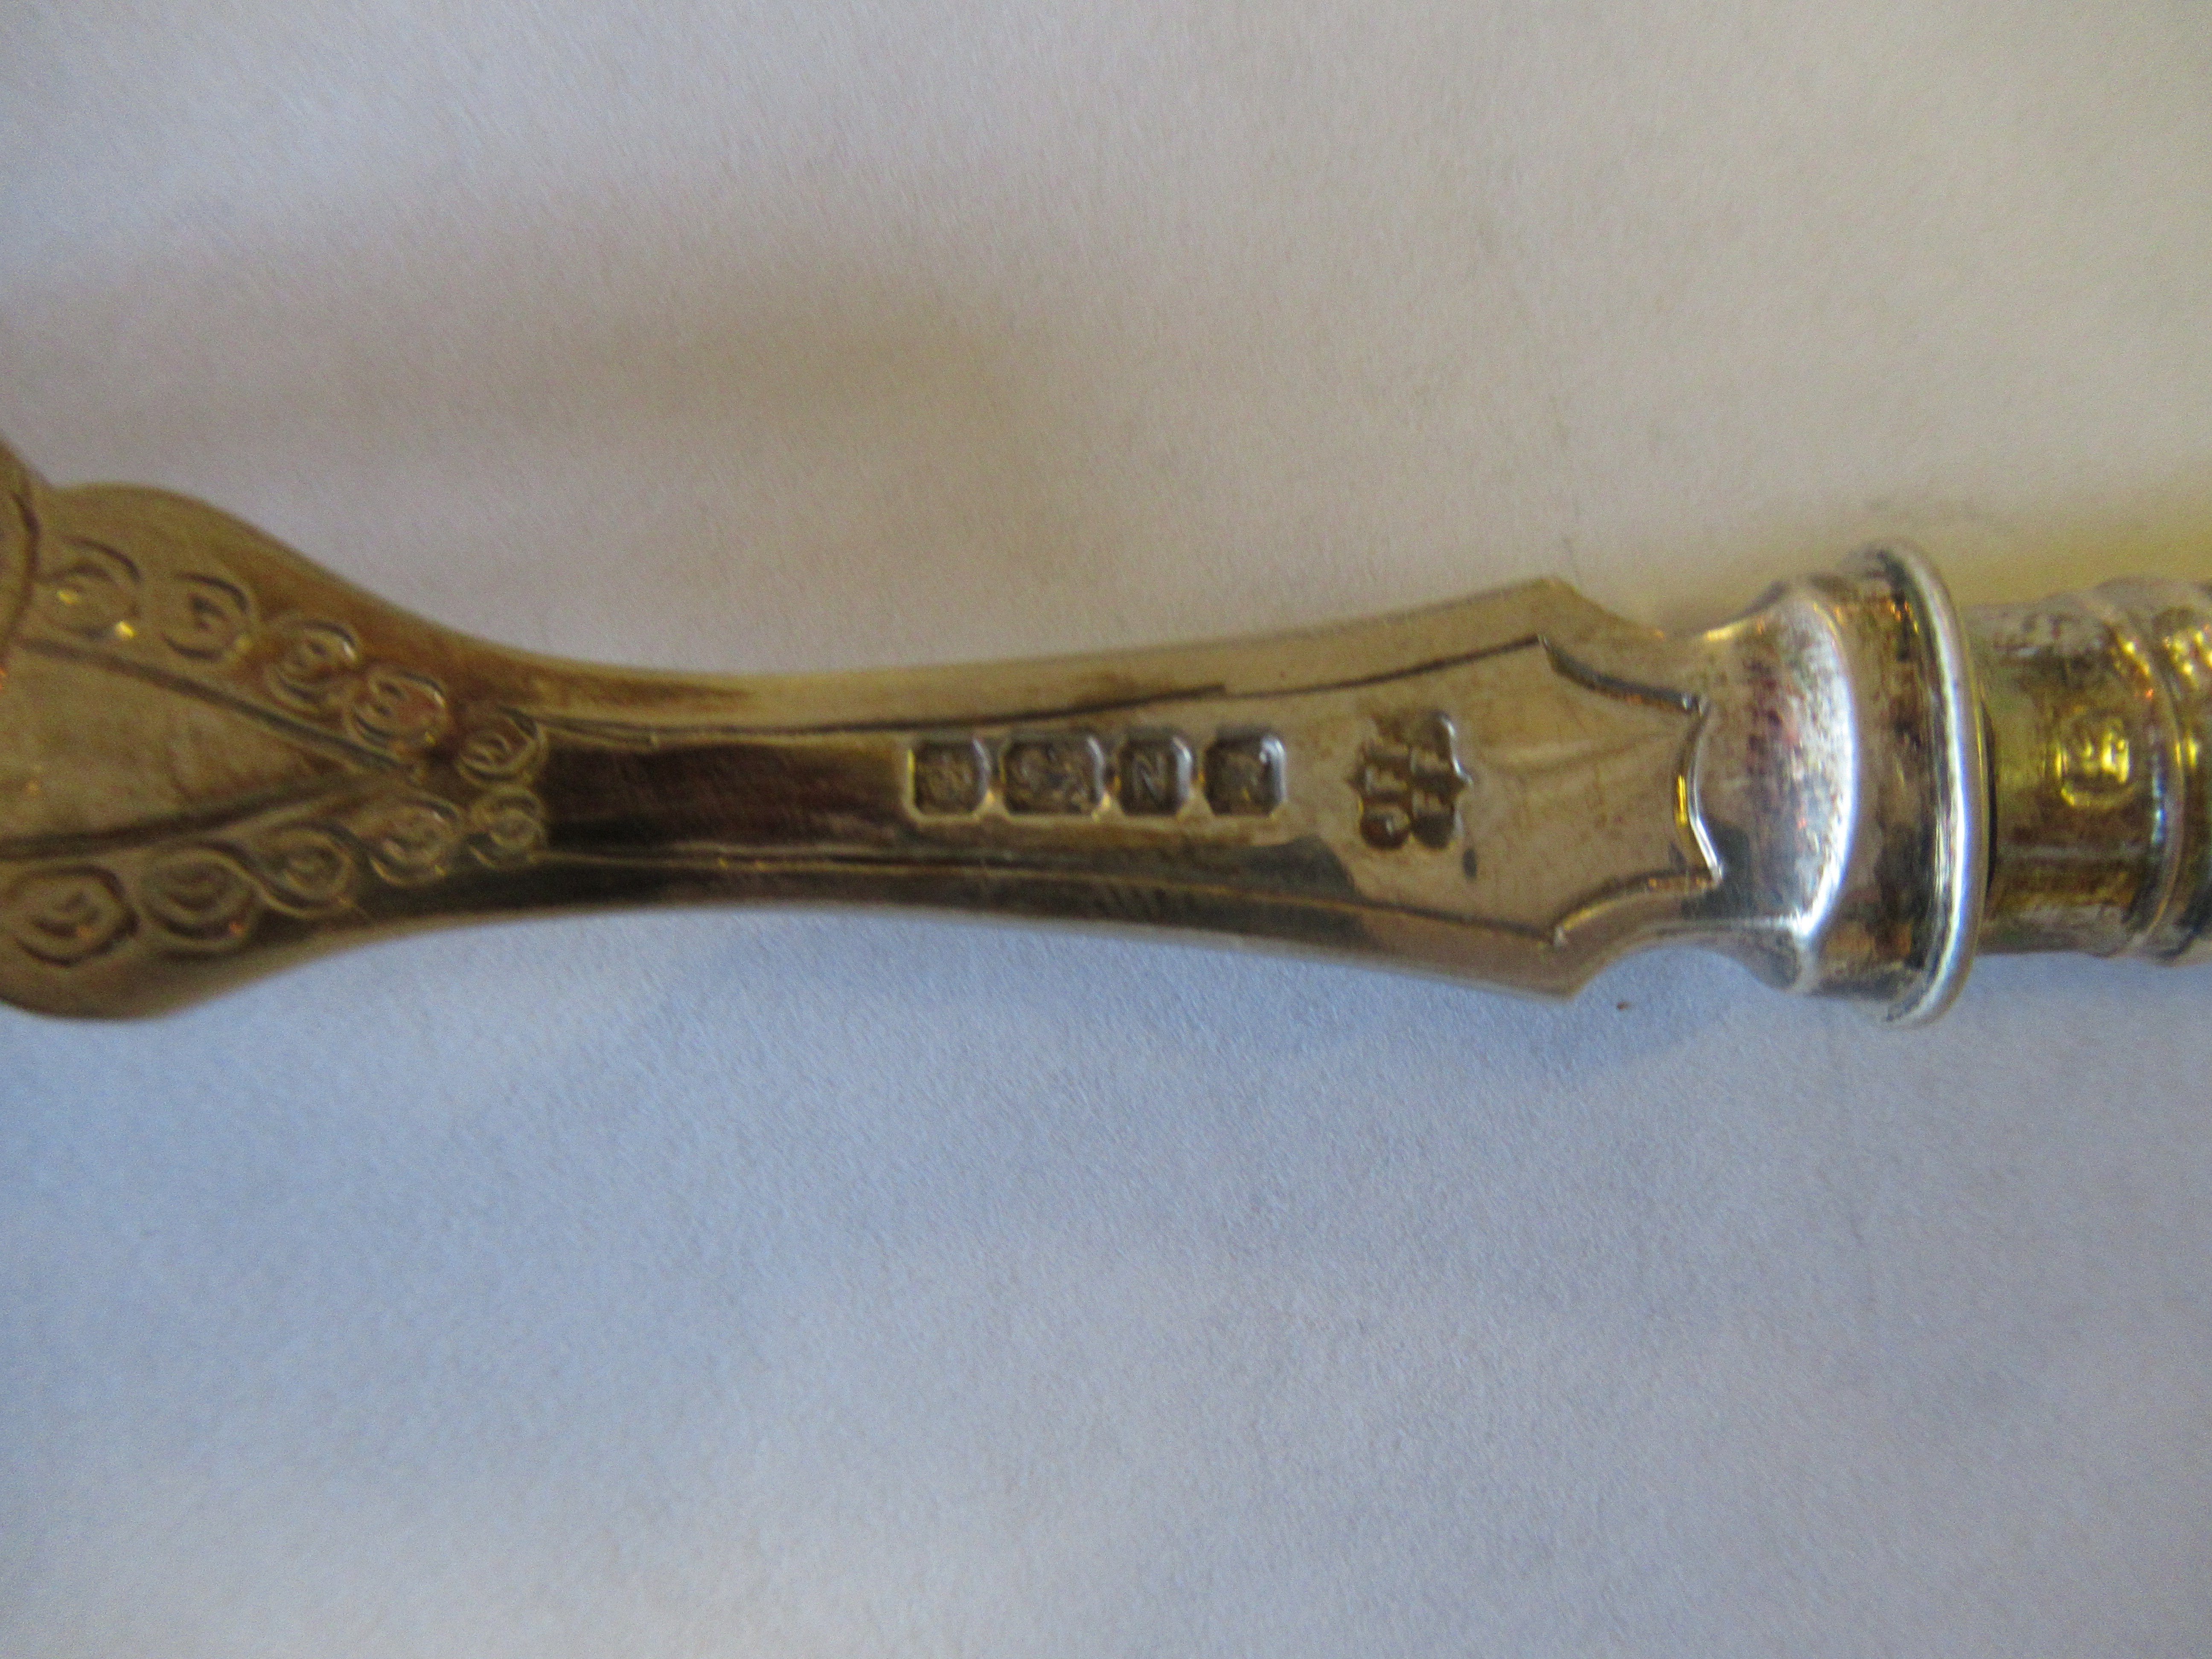 Cased pair of silver berry spoons with embossed decoration, hallmarked London 1780, maker Thomas - Image 2 of 2